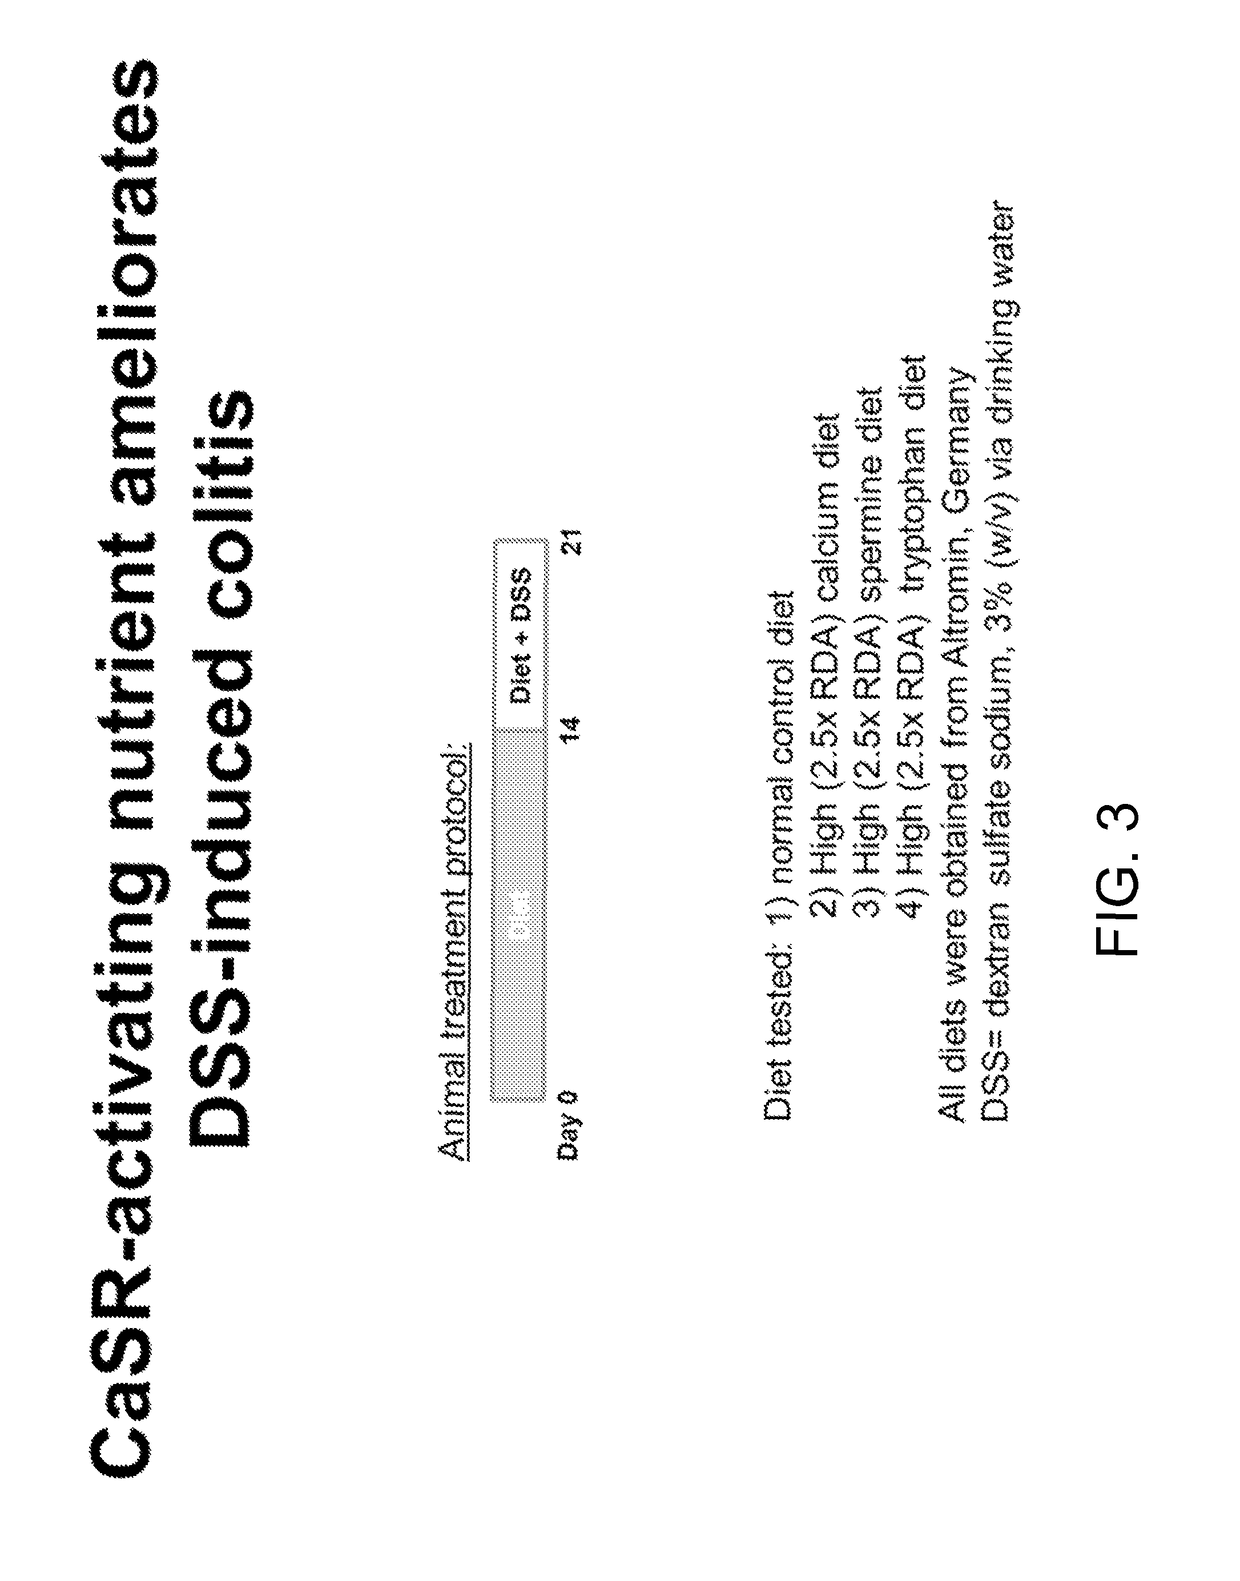 Materials and methods for prevention and treatment of diarrhea and inflammation in the gastrointestinal tract